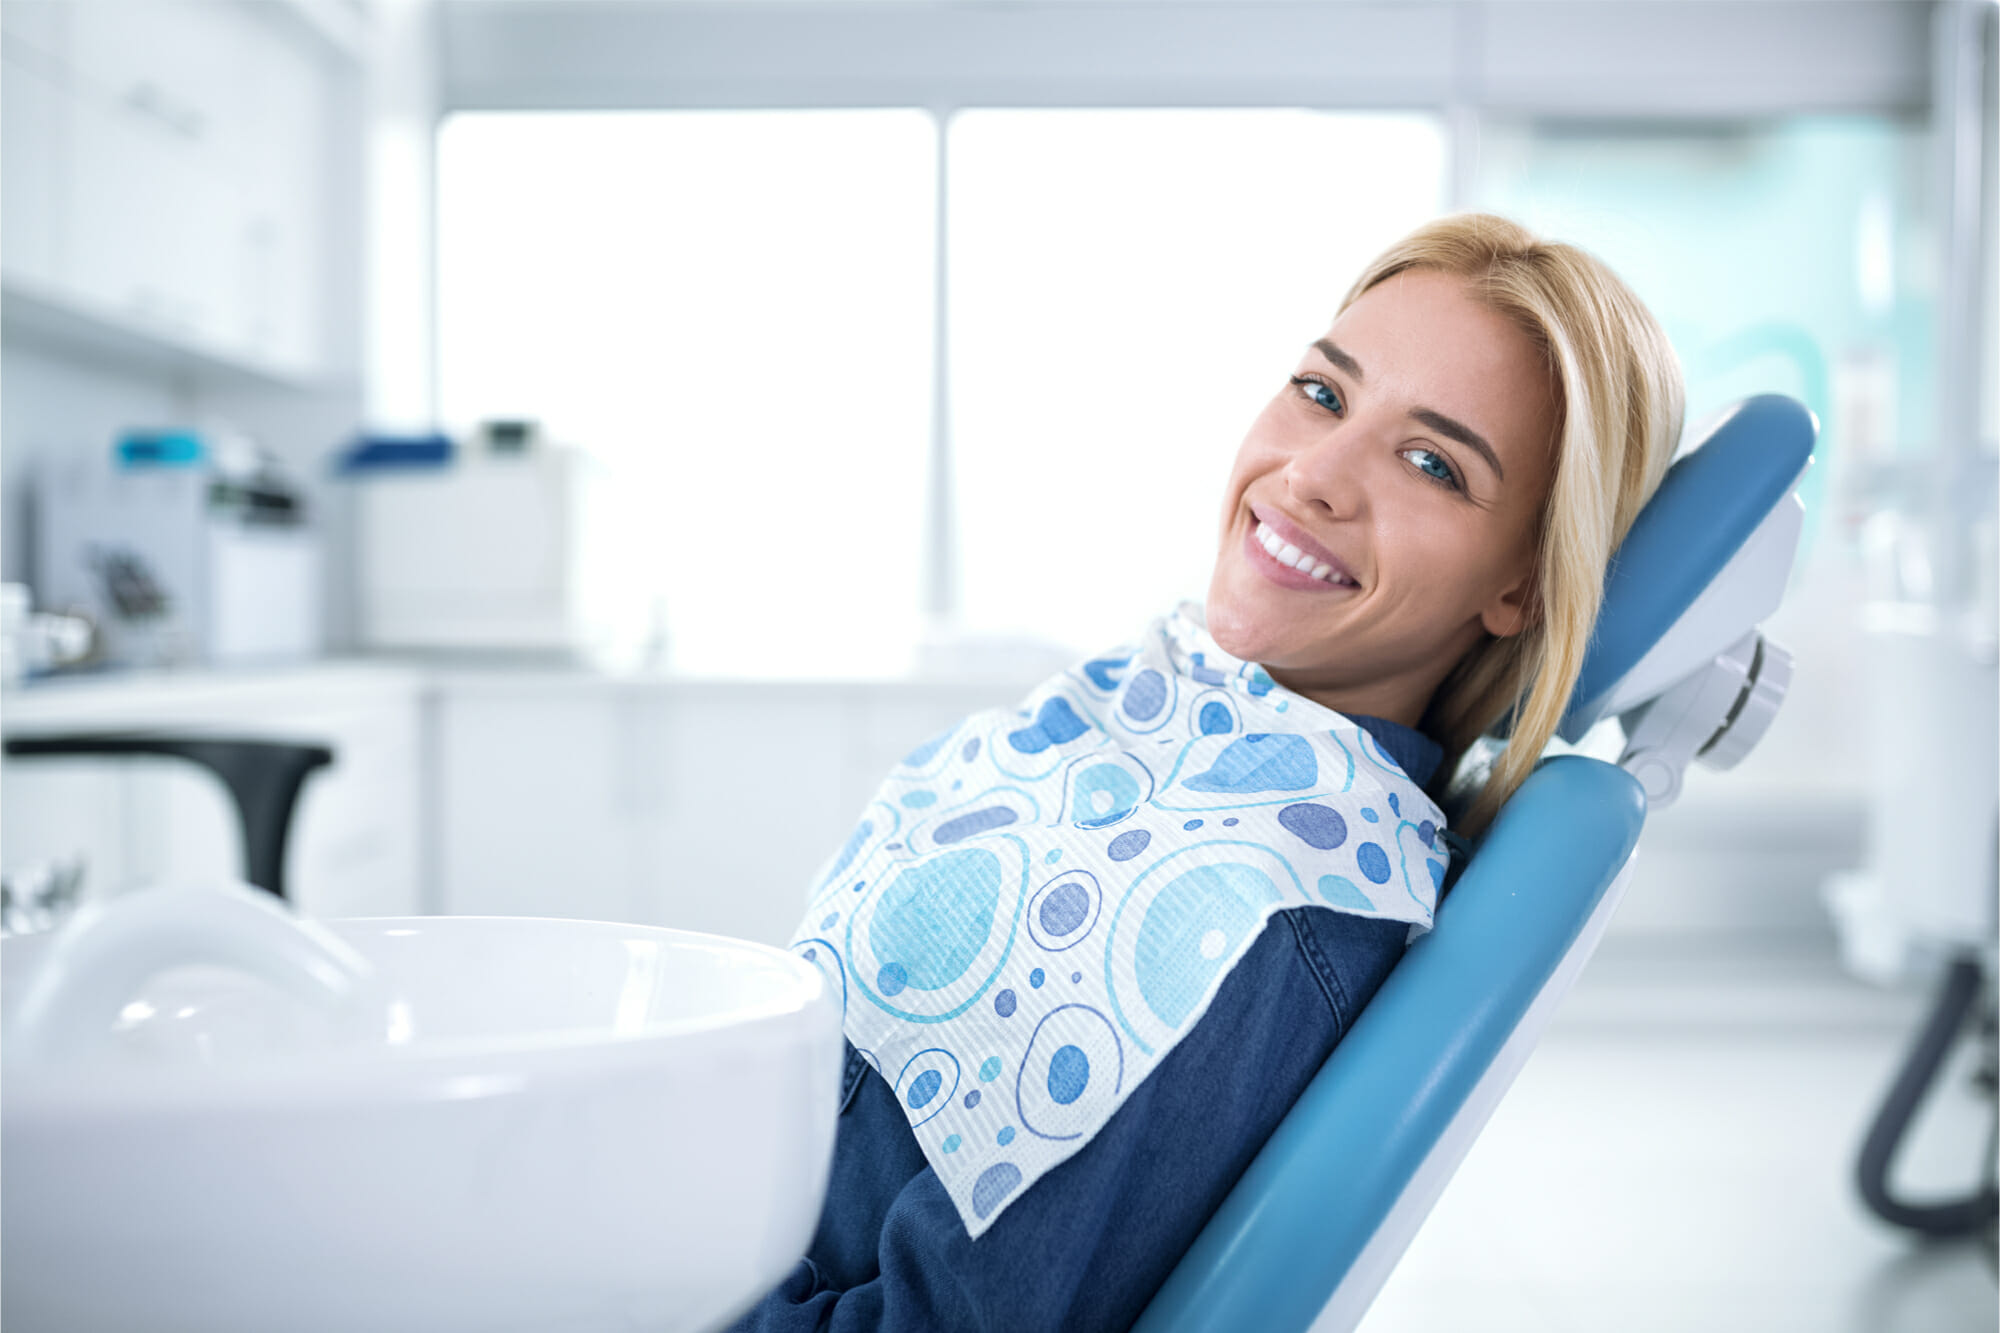 smiling woman sitting in dental exam chair